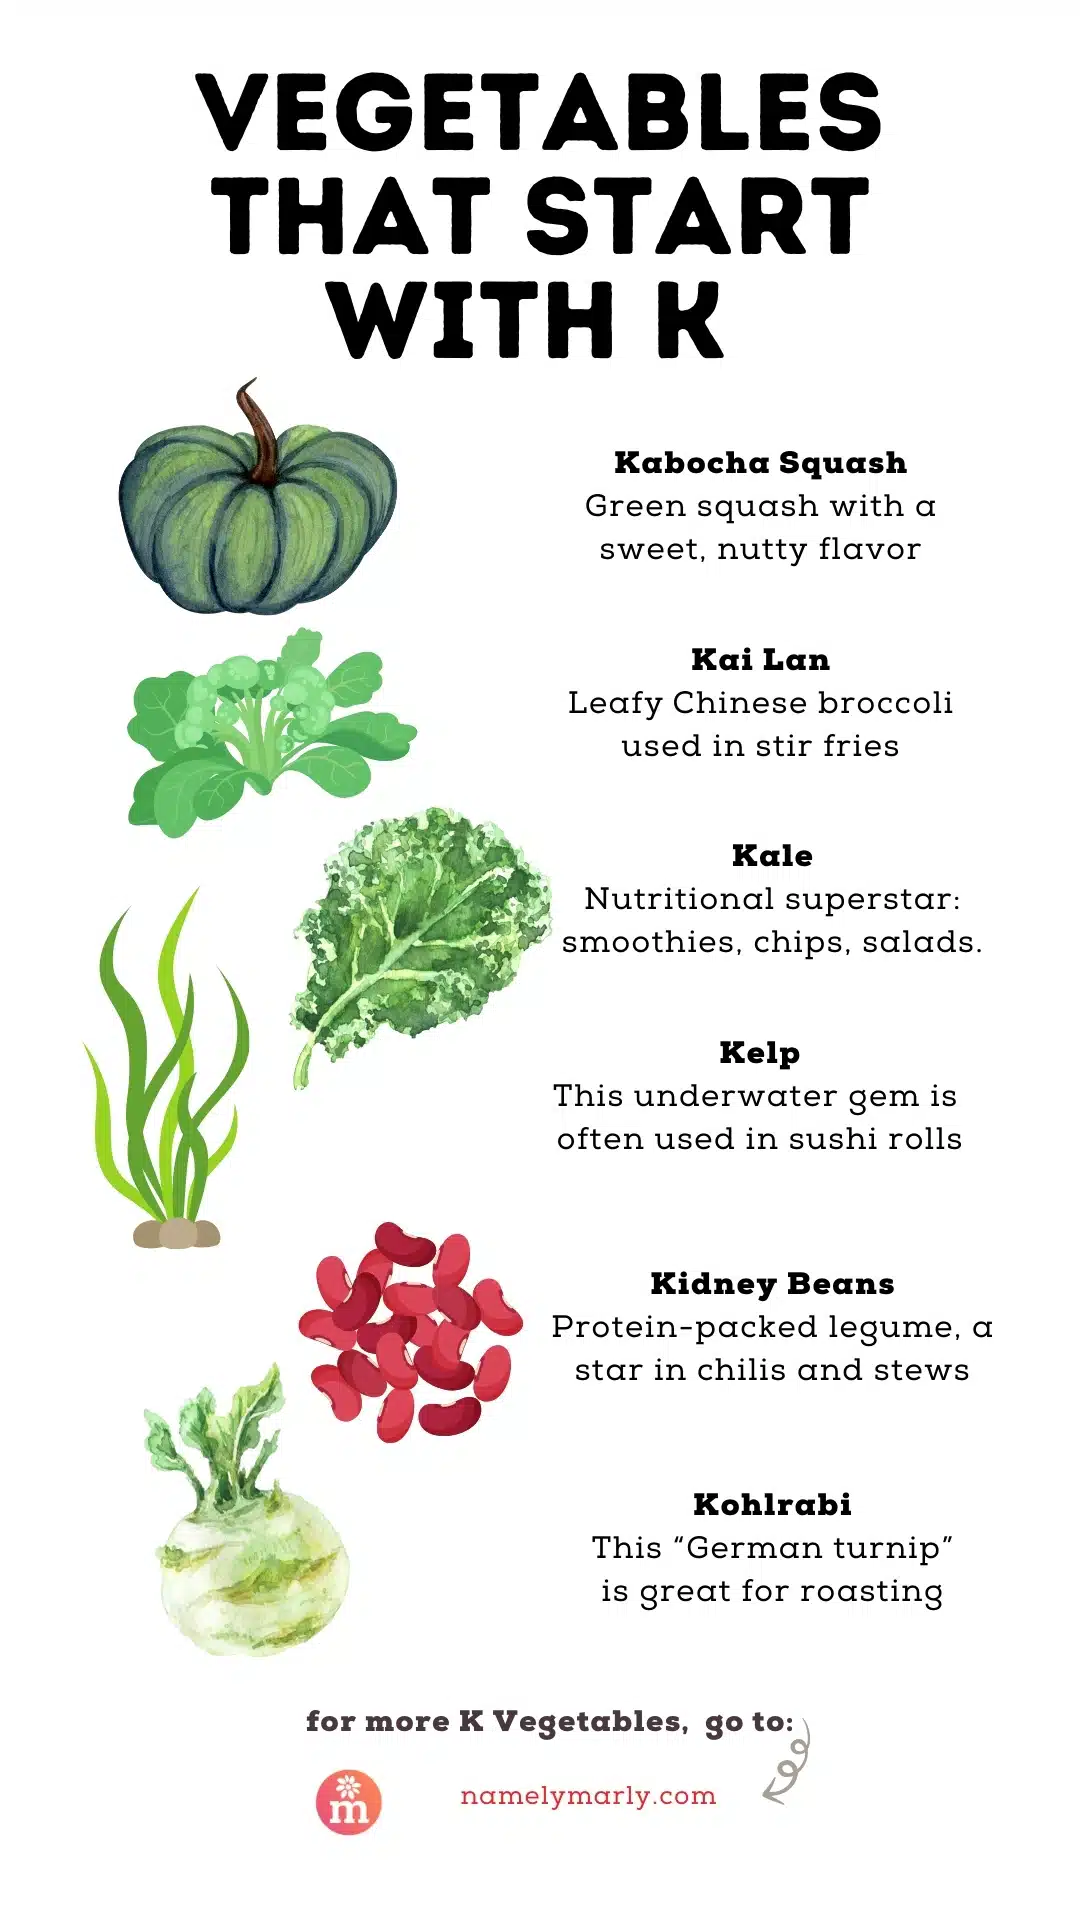 An infographic is titled, Vegetables that Start with K. There are graphics of different vegetables and the text next to them reads, Kabocha Squash
Green squash with a sweet, nutty flavor; Kai Lan
Leafy Chinese broccoli used in stir fries; Kale
Nutritional superstar: smoothies, chips, salads; Kelp
This underwater gem is  often used in sushi rolls; Kidney Beans
Protein-packed legume, a star in chilis and stews; Kohlrabi
This “German turnip” is great for roasting. At the bottom it says, for more K Vegetables,  go to: namelymarly.com